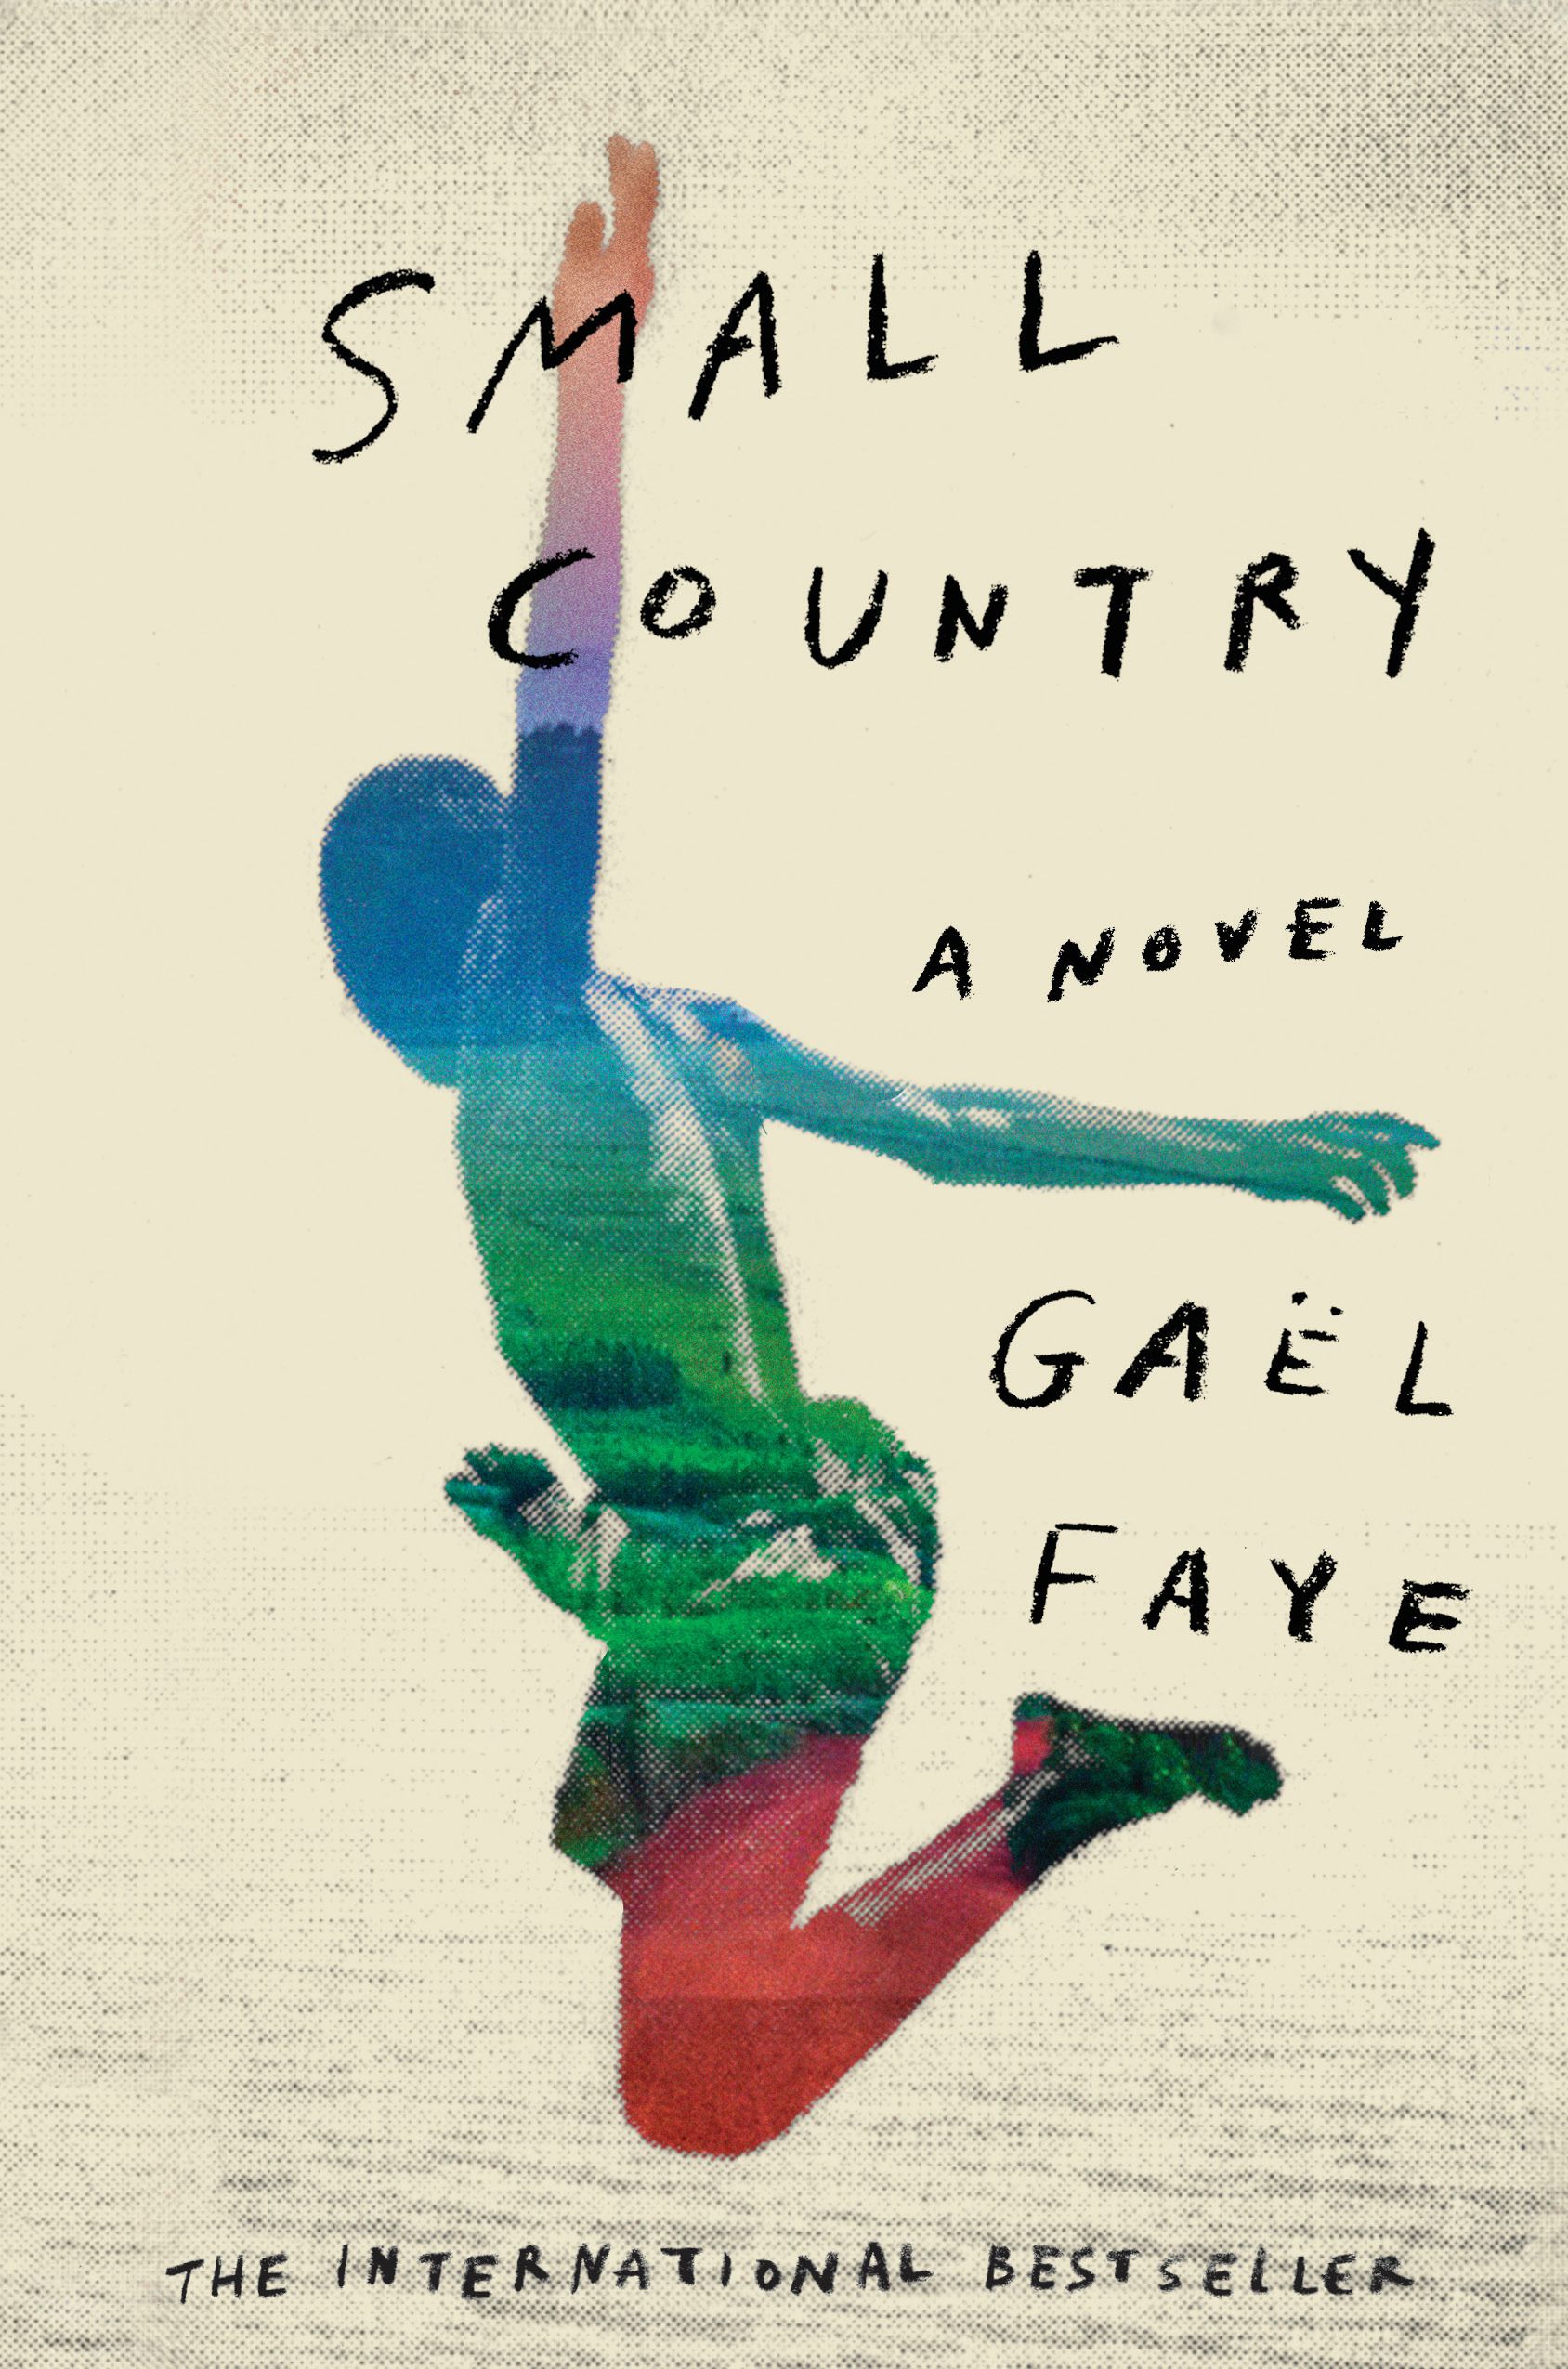 Small Country book cover